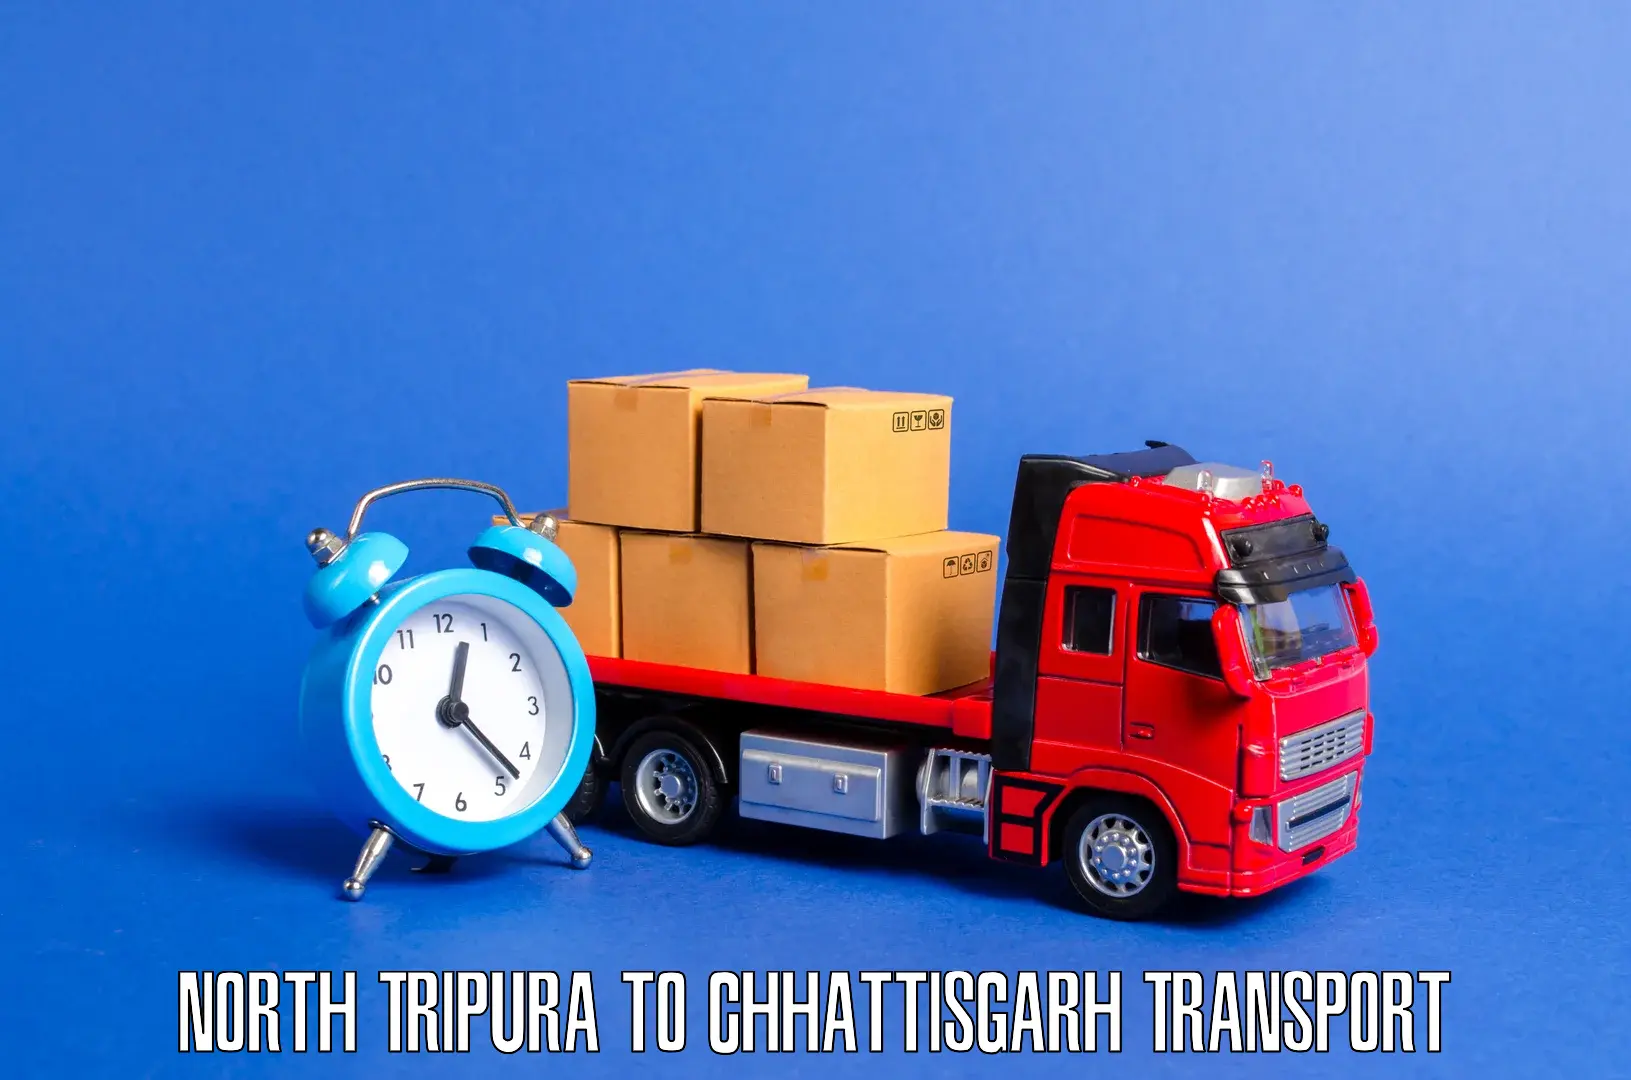 Cargo transport services in North Tripura to Abhanpur